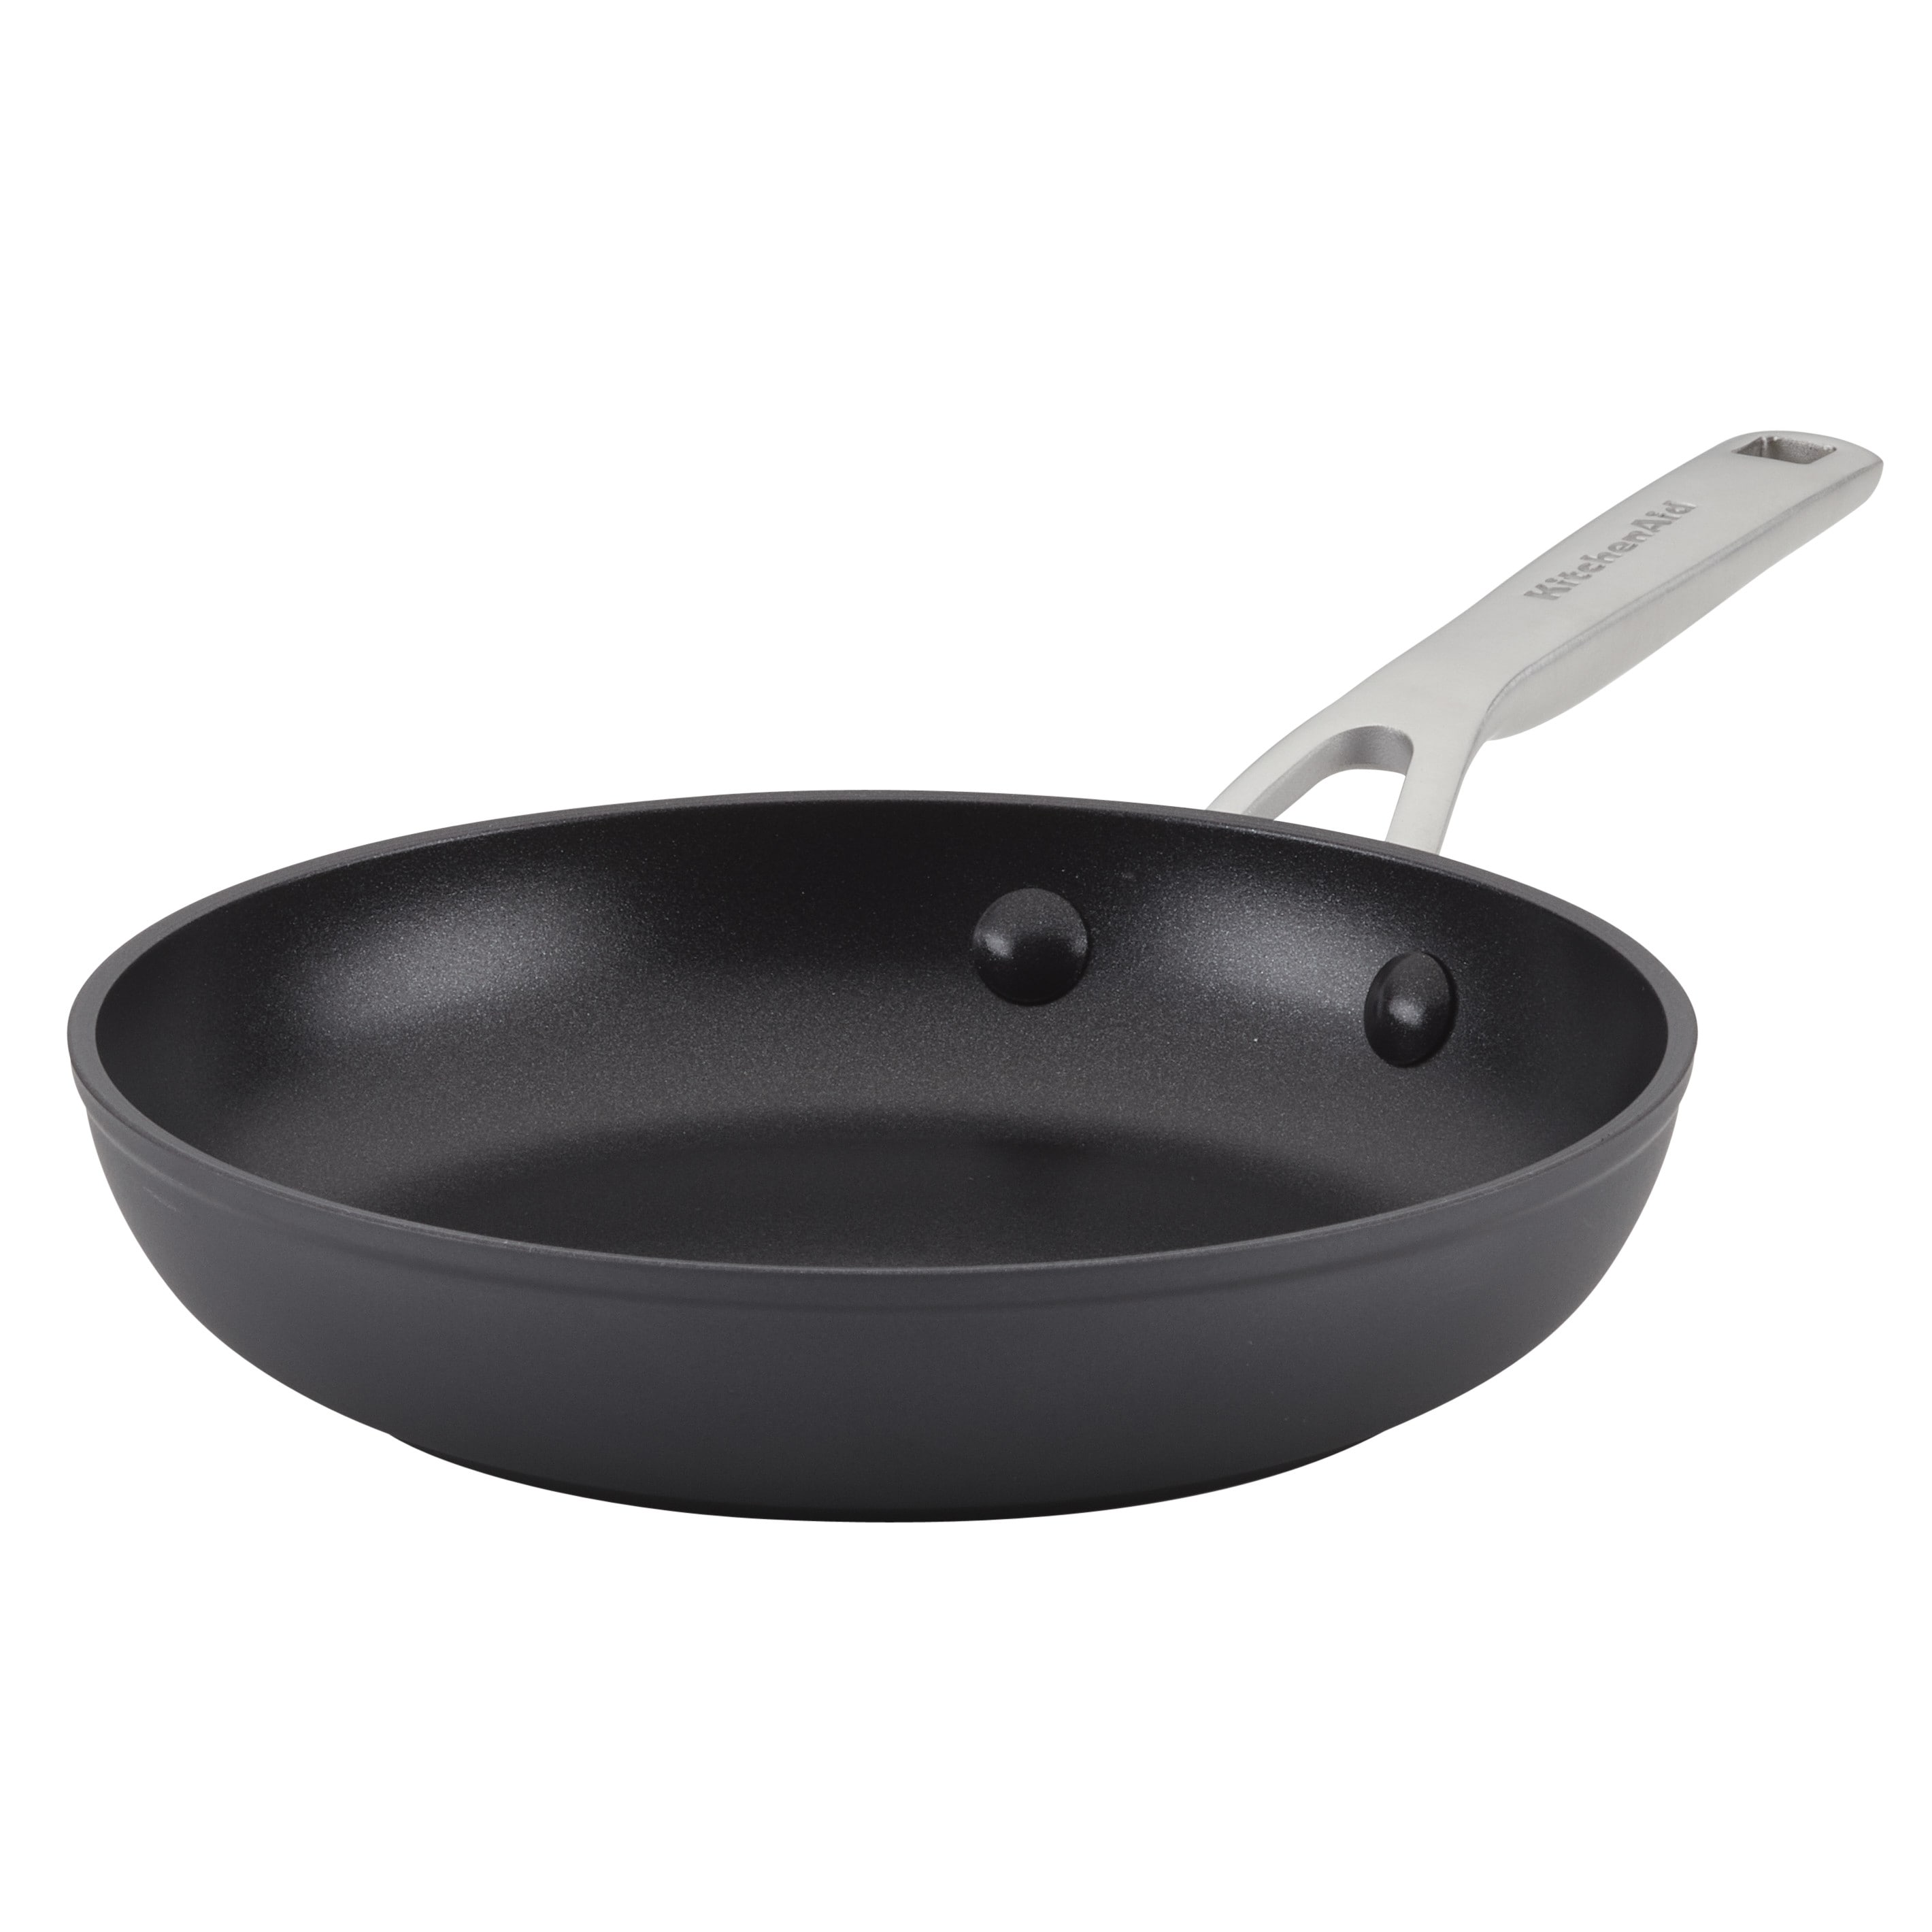 KitchenAid Hard-Anodized Induction Nonstick Frying Pan, 8.25-Inch